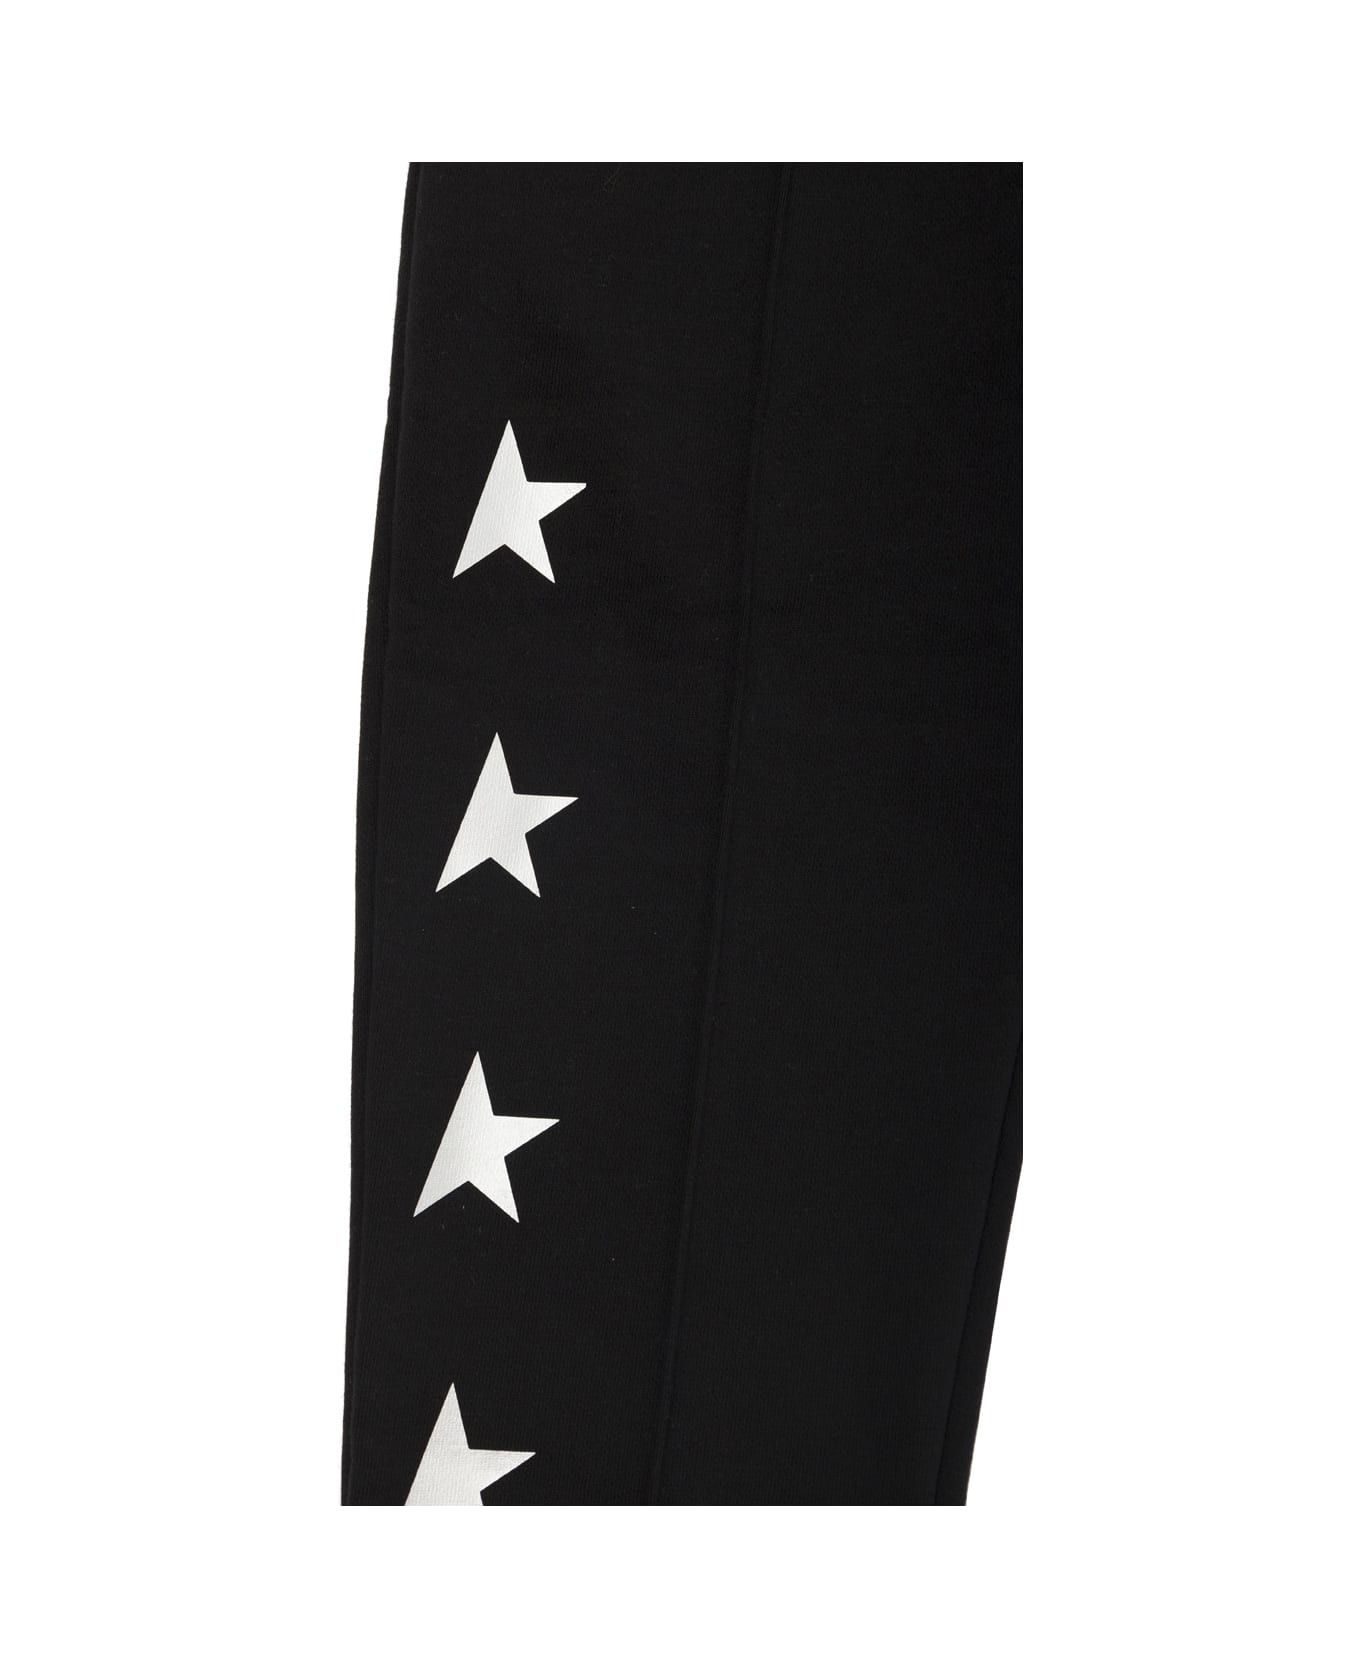 Golden Goose Star / Boy's Jogging Pants Tapared Leg / Multistar Printed Include Cod Gyp - Black ボトムス